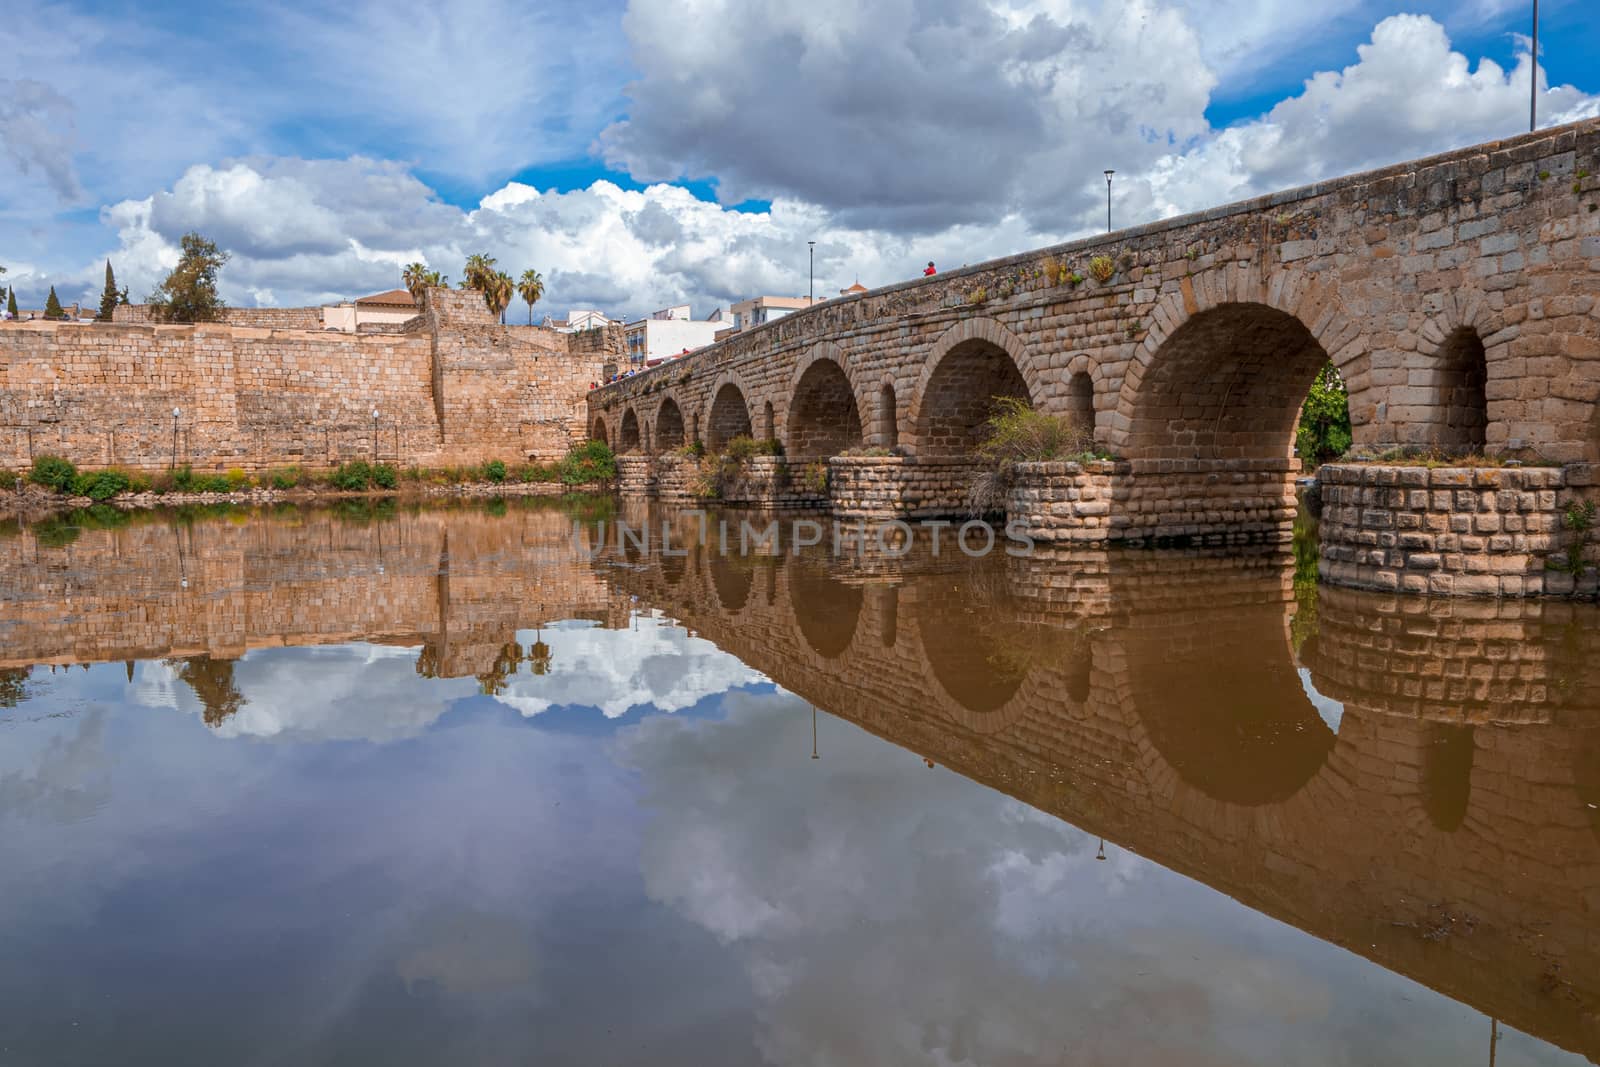 View of the Roman bridge of Merida with its reflection on the Guadiana river. Merida. Spain.The Archaeological Ensemble of Merida is declared a UNESCO World Heritage Site Ref 664